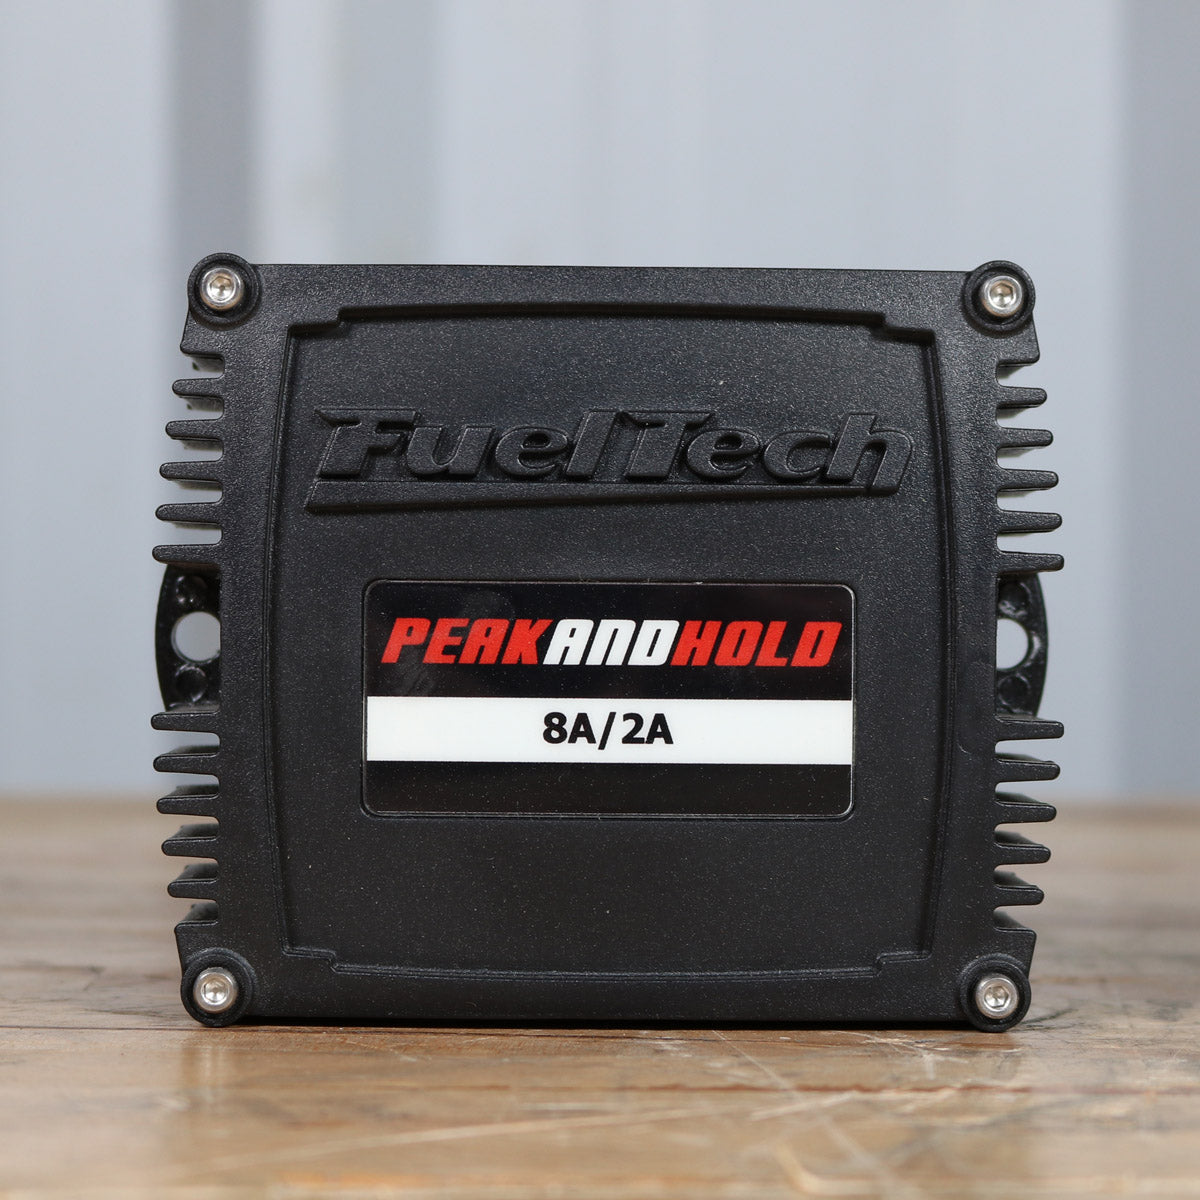 FUELTECH PEAK & HOLD INJECTOR DRIVER 8A/2A